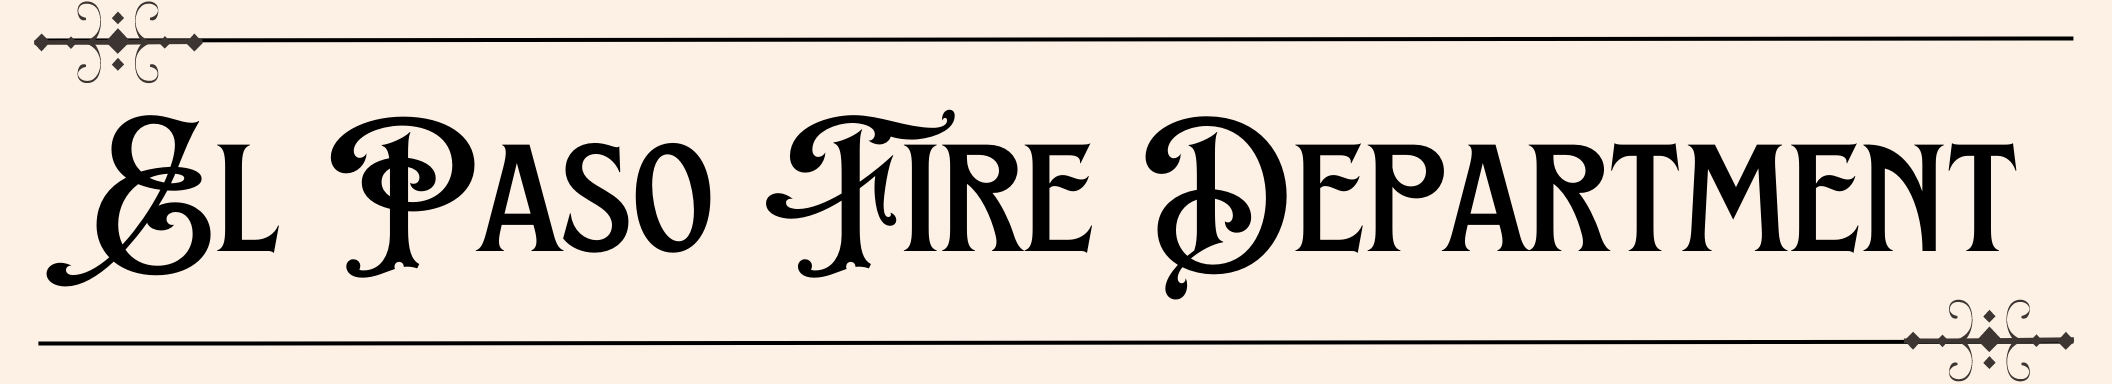 1-Fire-dept-title-panel.png